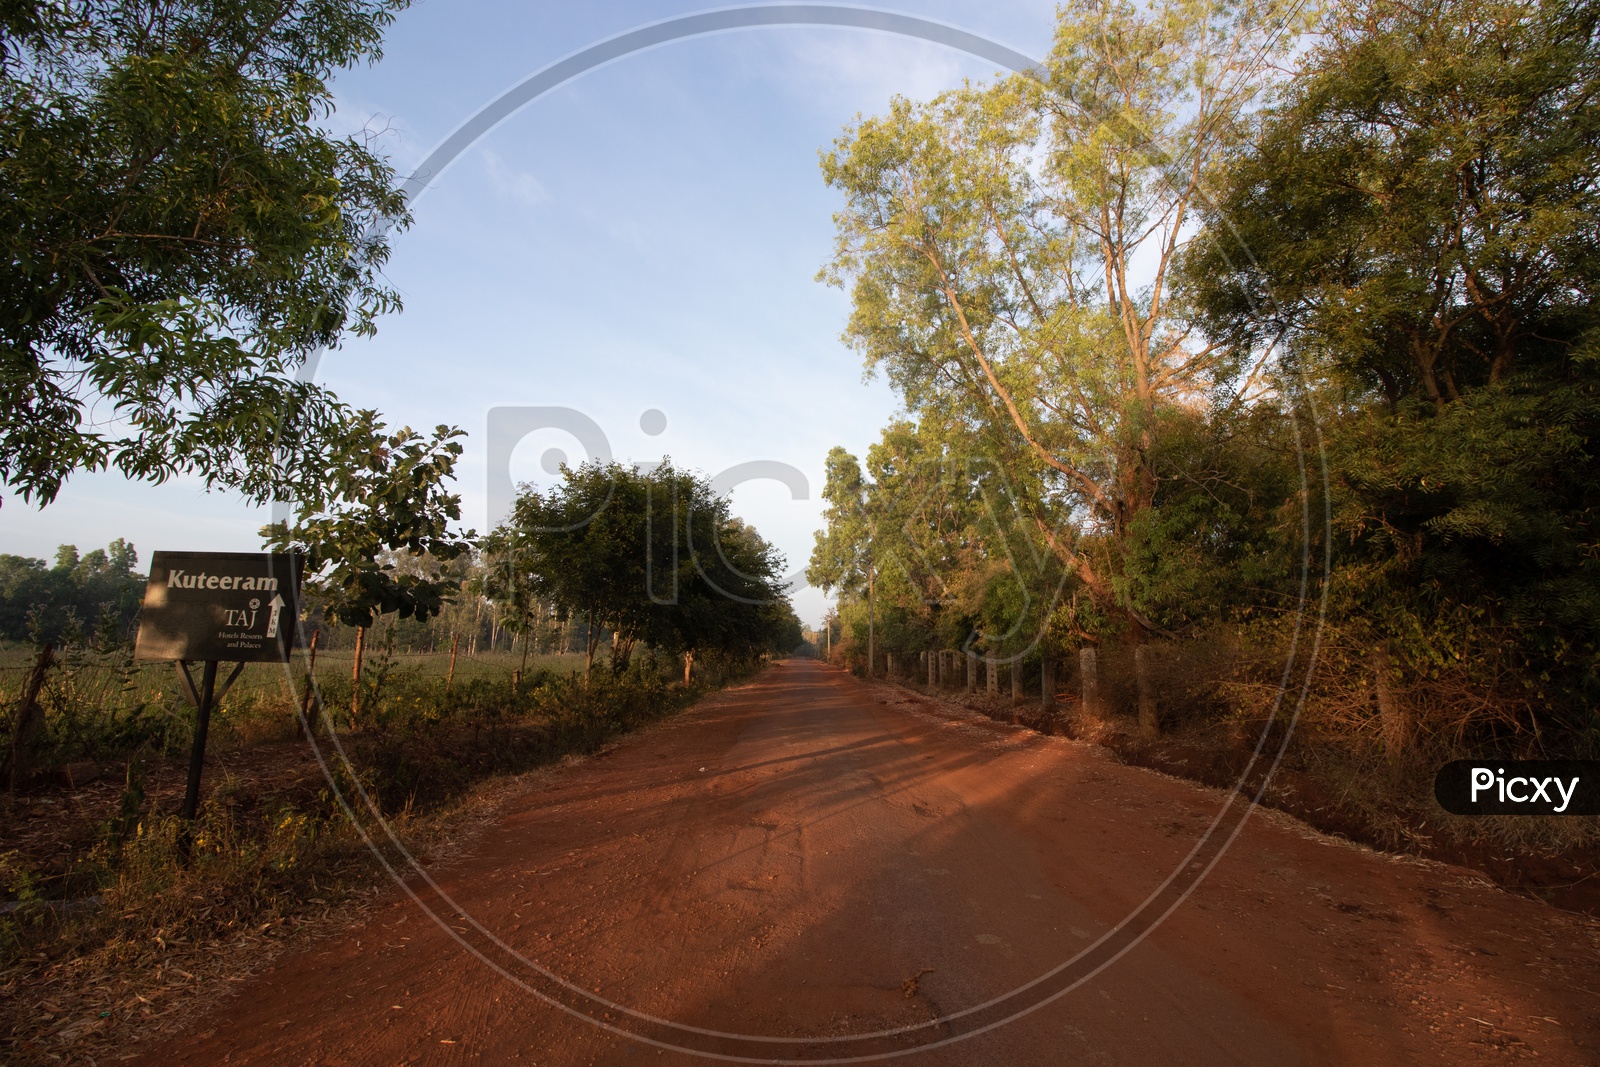 Metal Roads In Villages In India